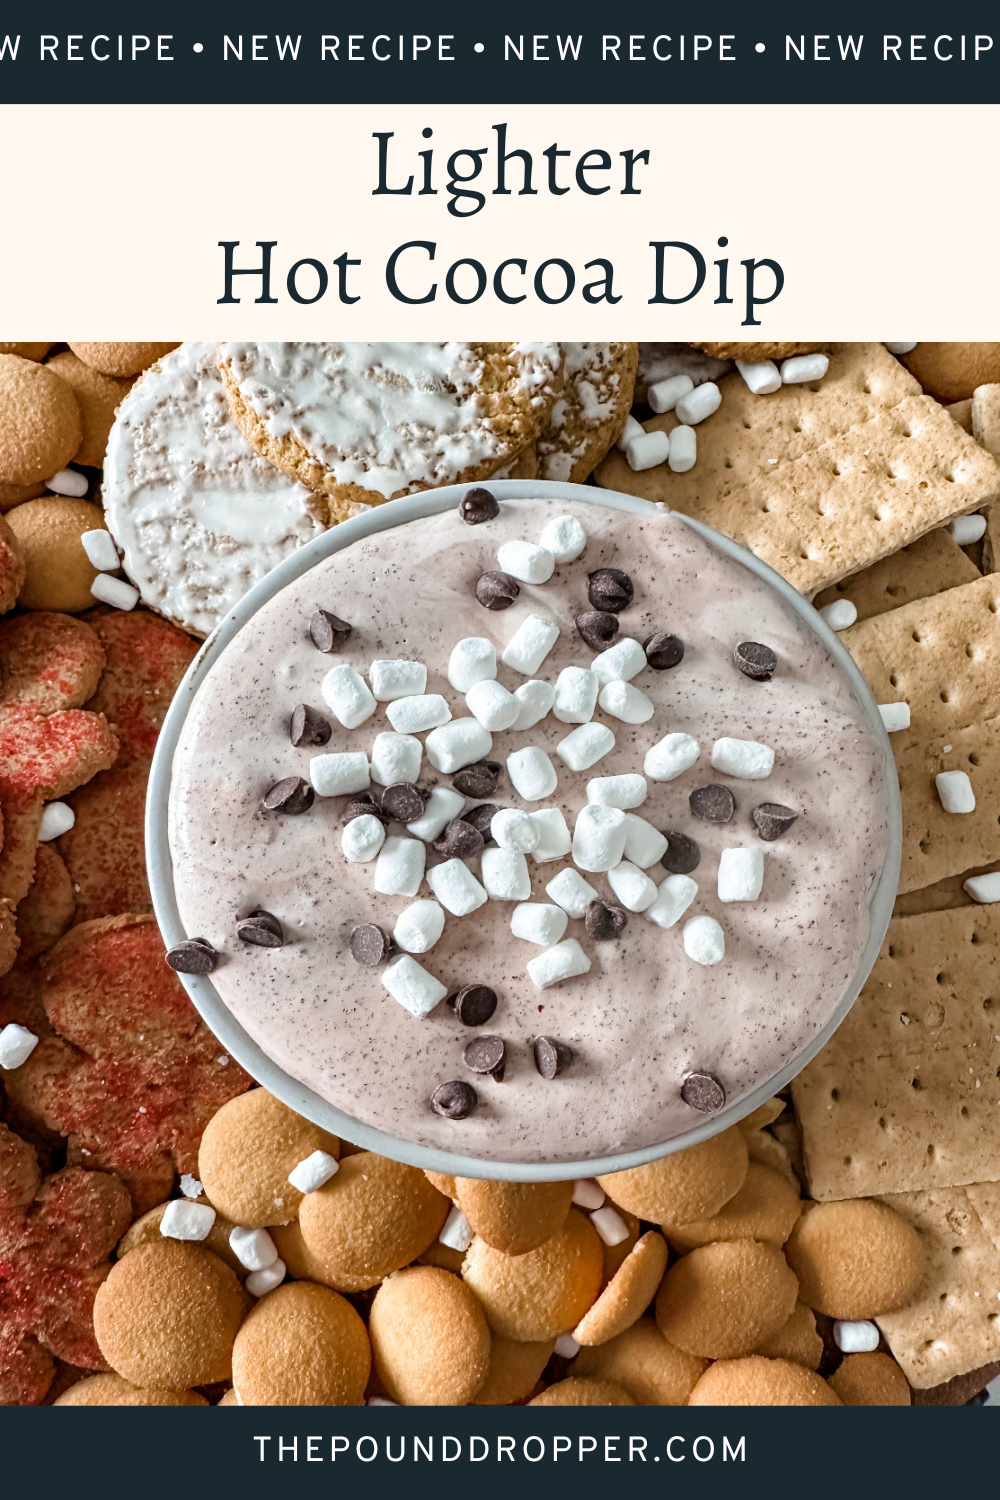 This Lighter Hot Cocoa Dip is an easy no bake dessert dip that is perfect for holiday parties or family movie night! via @pounddropper